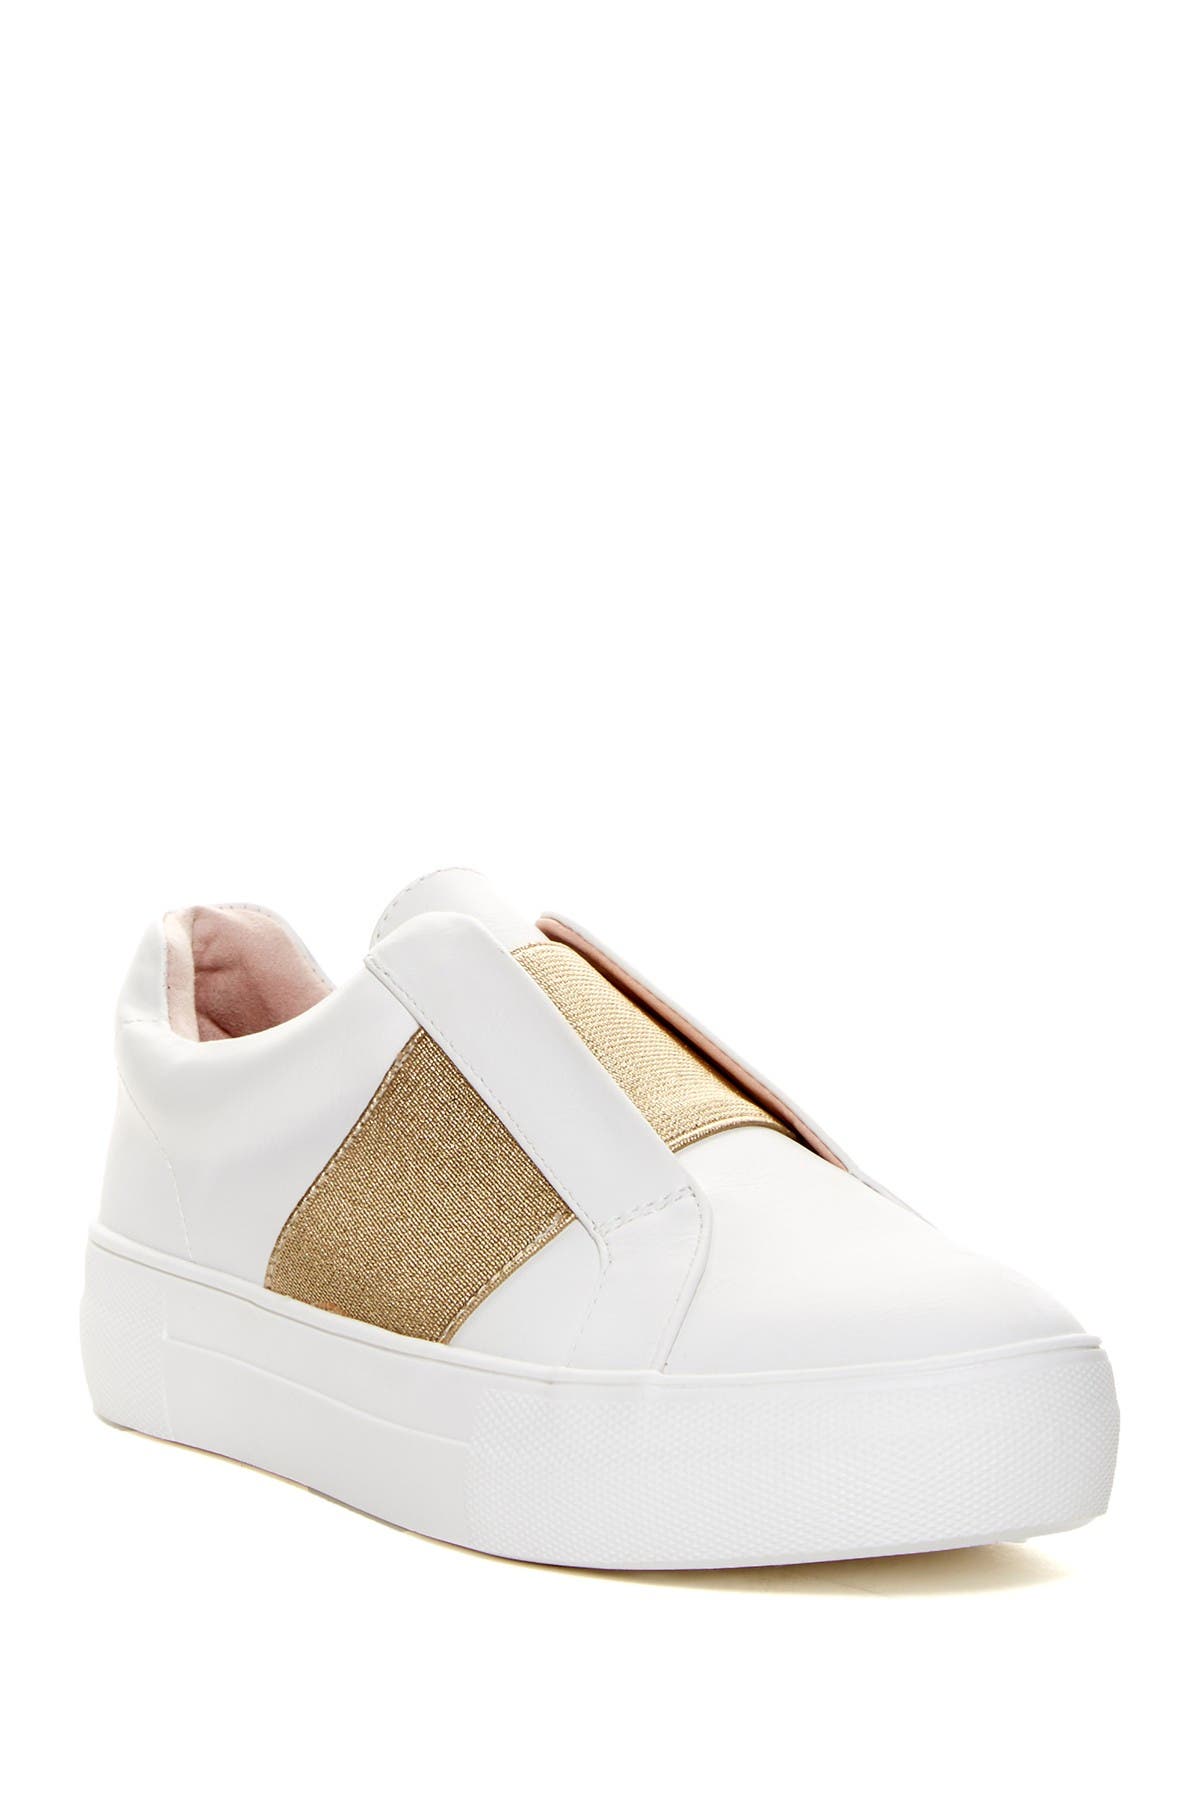 topshop slip on trainers